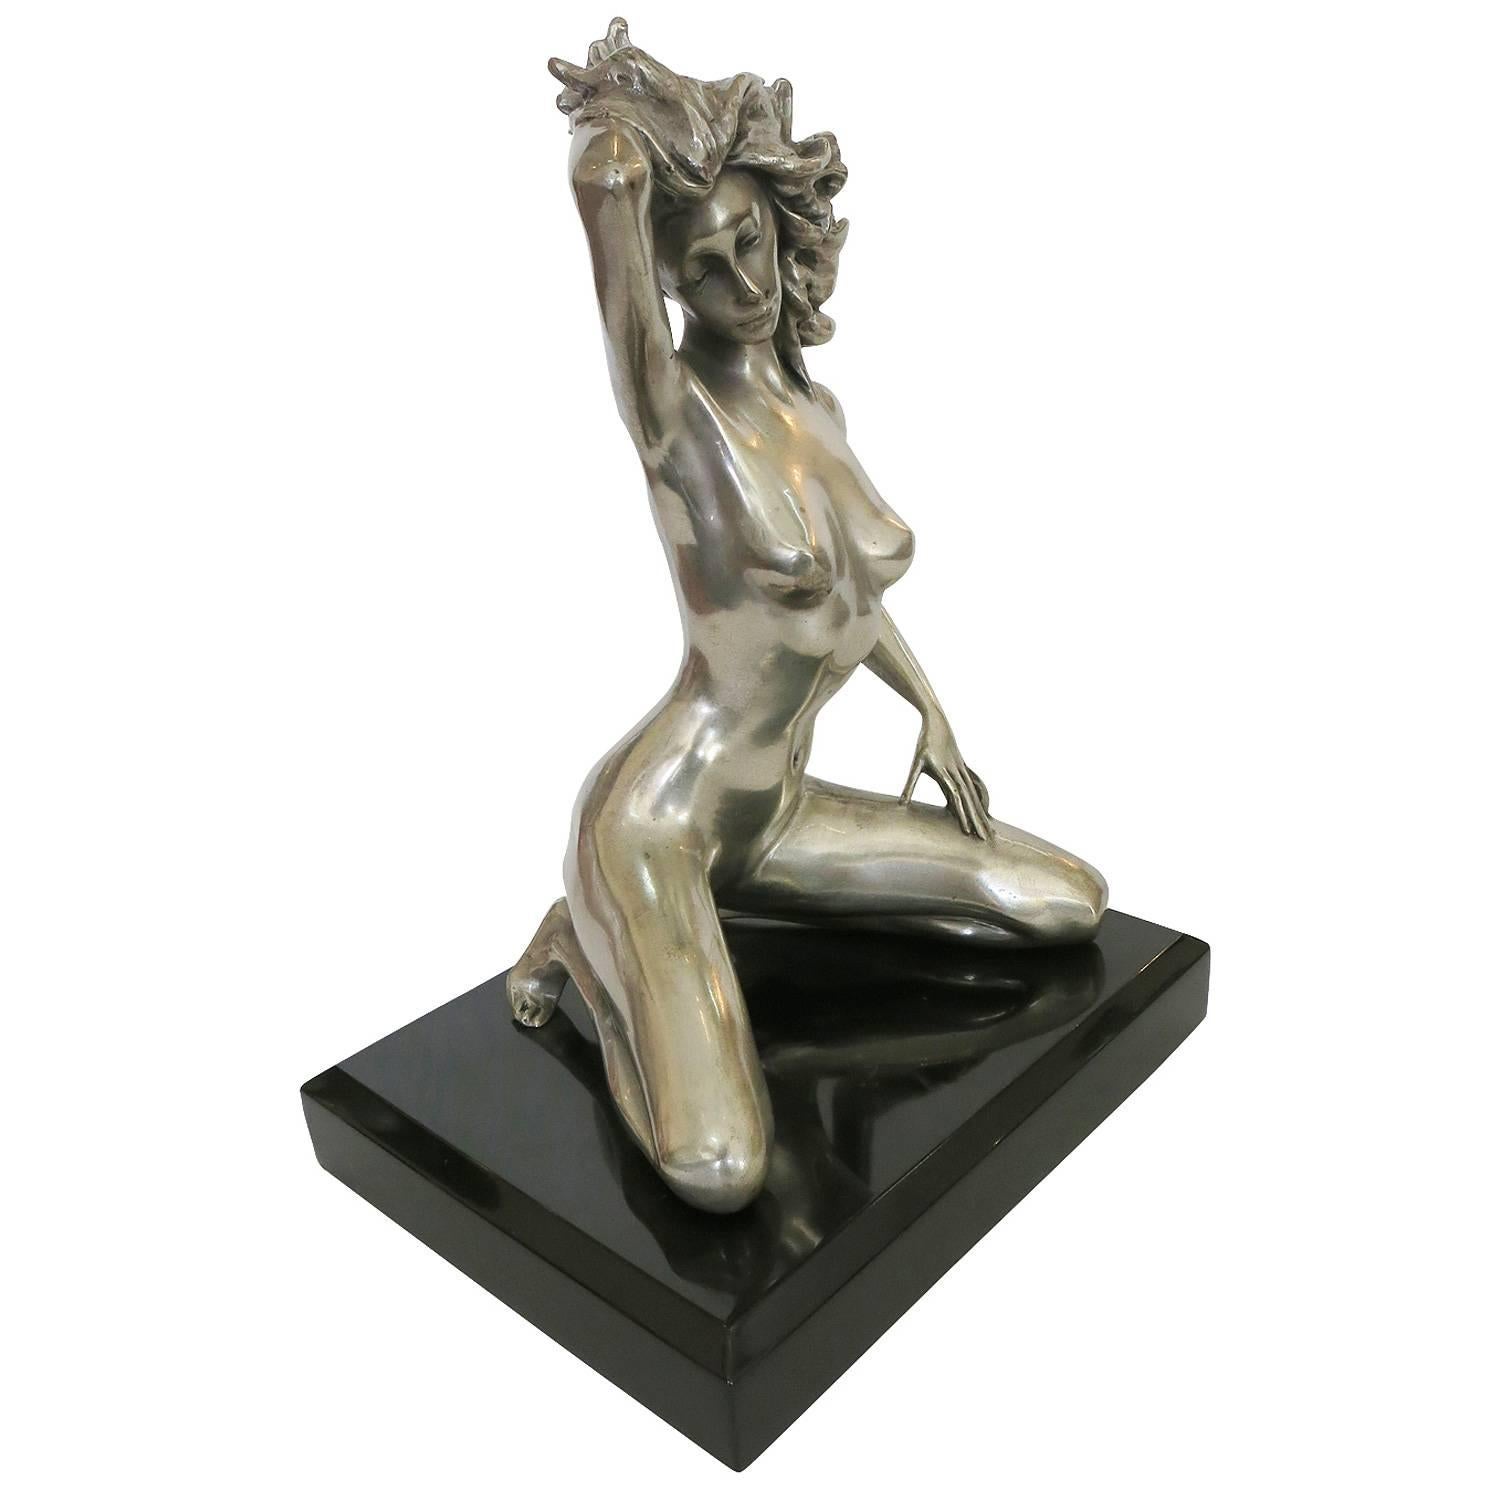 1970s style erotic bronze re-cast of a kneeling nude woman with one hand resting against her wind blown hair, one hand on her leg. Kneeling on a black mirror-finished marble square base, unsigned

Dimensions: 11? H x 8? W x 6.5? D.

Product